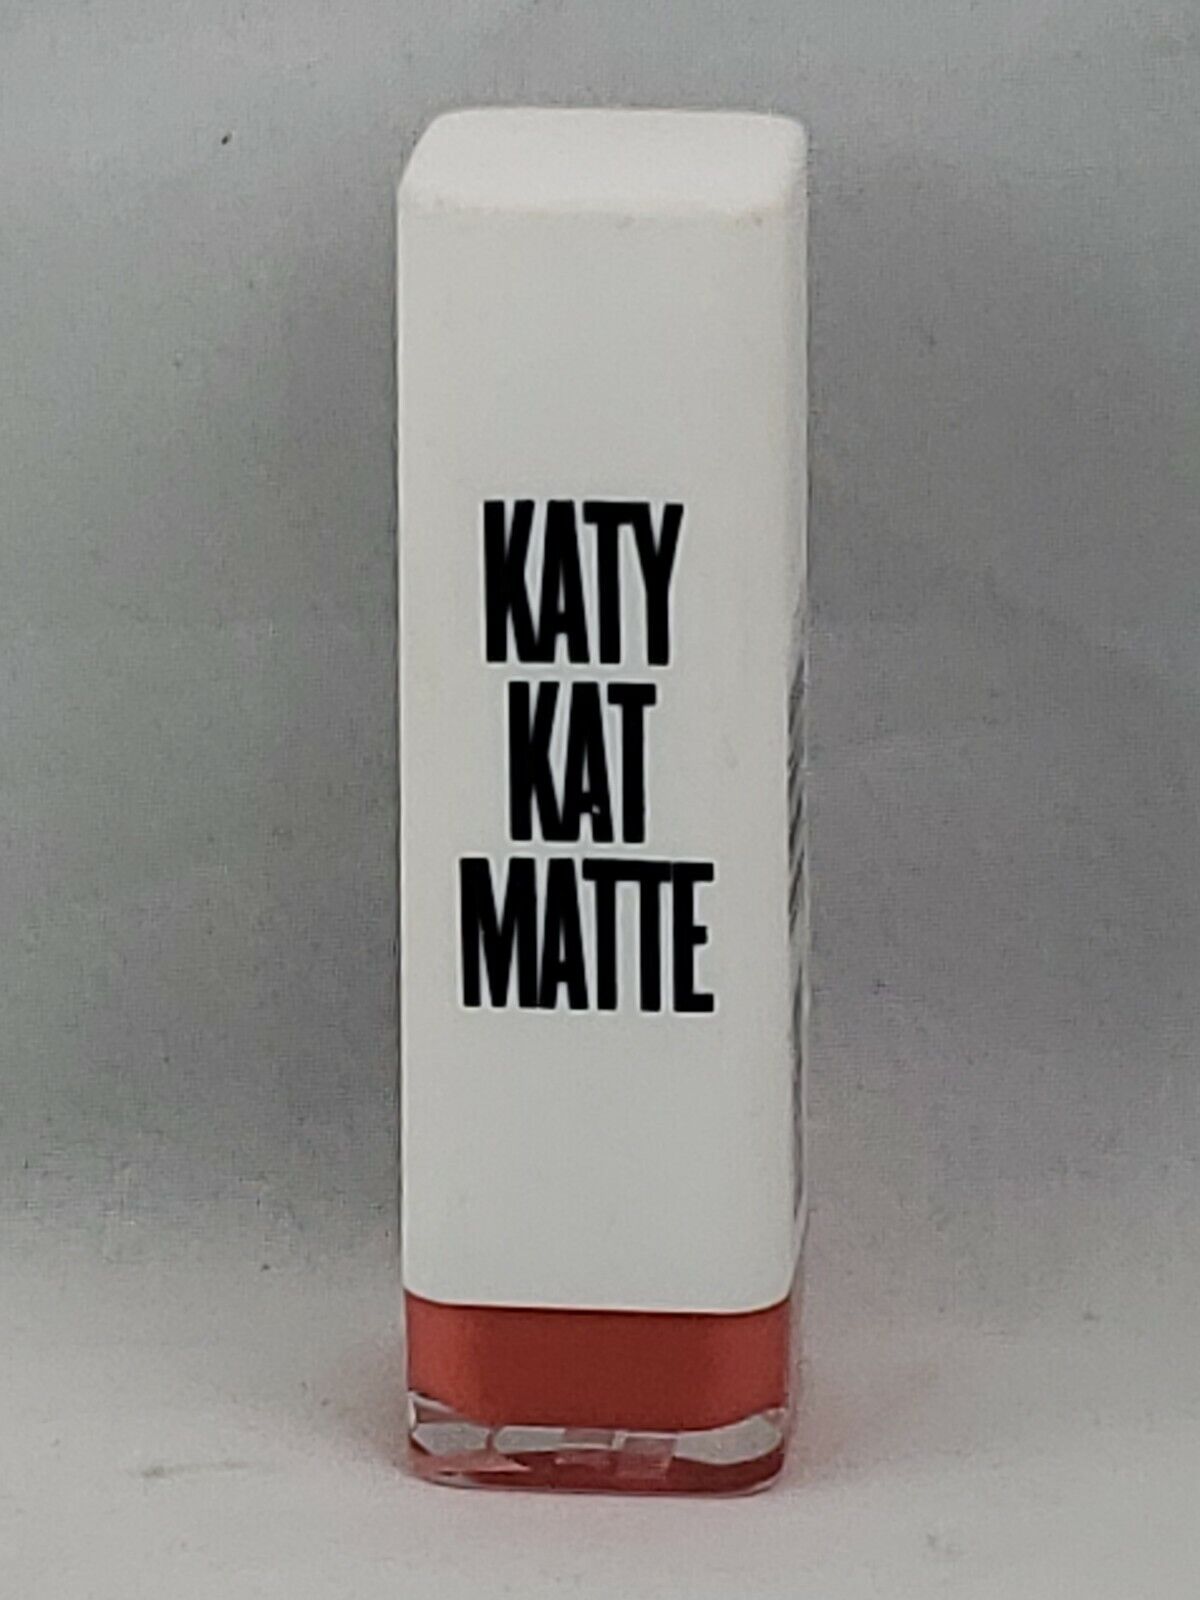 1 COVERGIRL Katy Kat Matte KP04 Cat Coral SEALED Lipstick Virginia Beach Max 45% OFF Mall